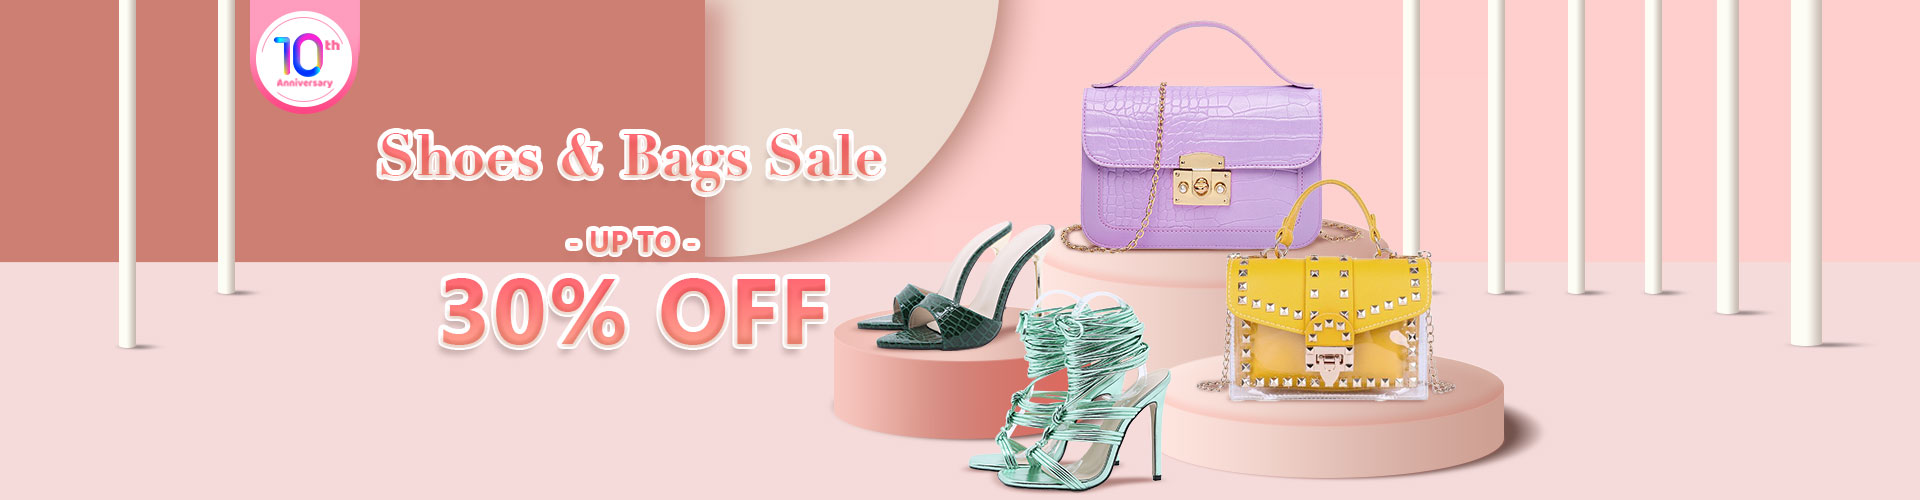 10th Anniversary Shoes &Bags Sale